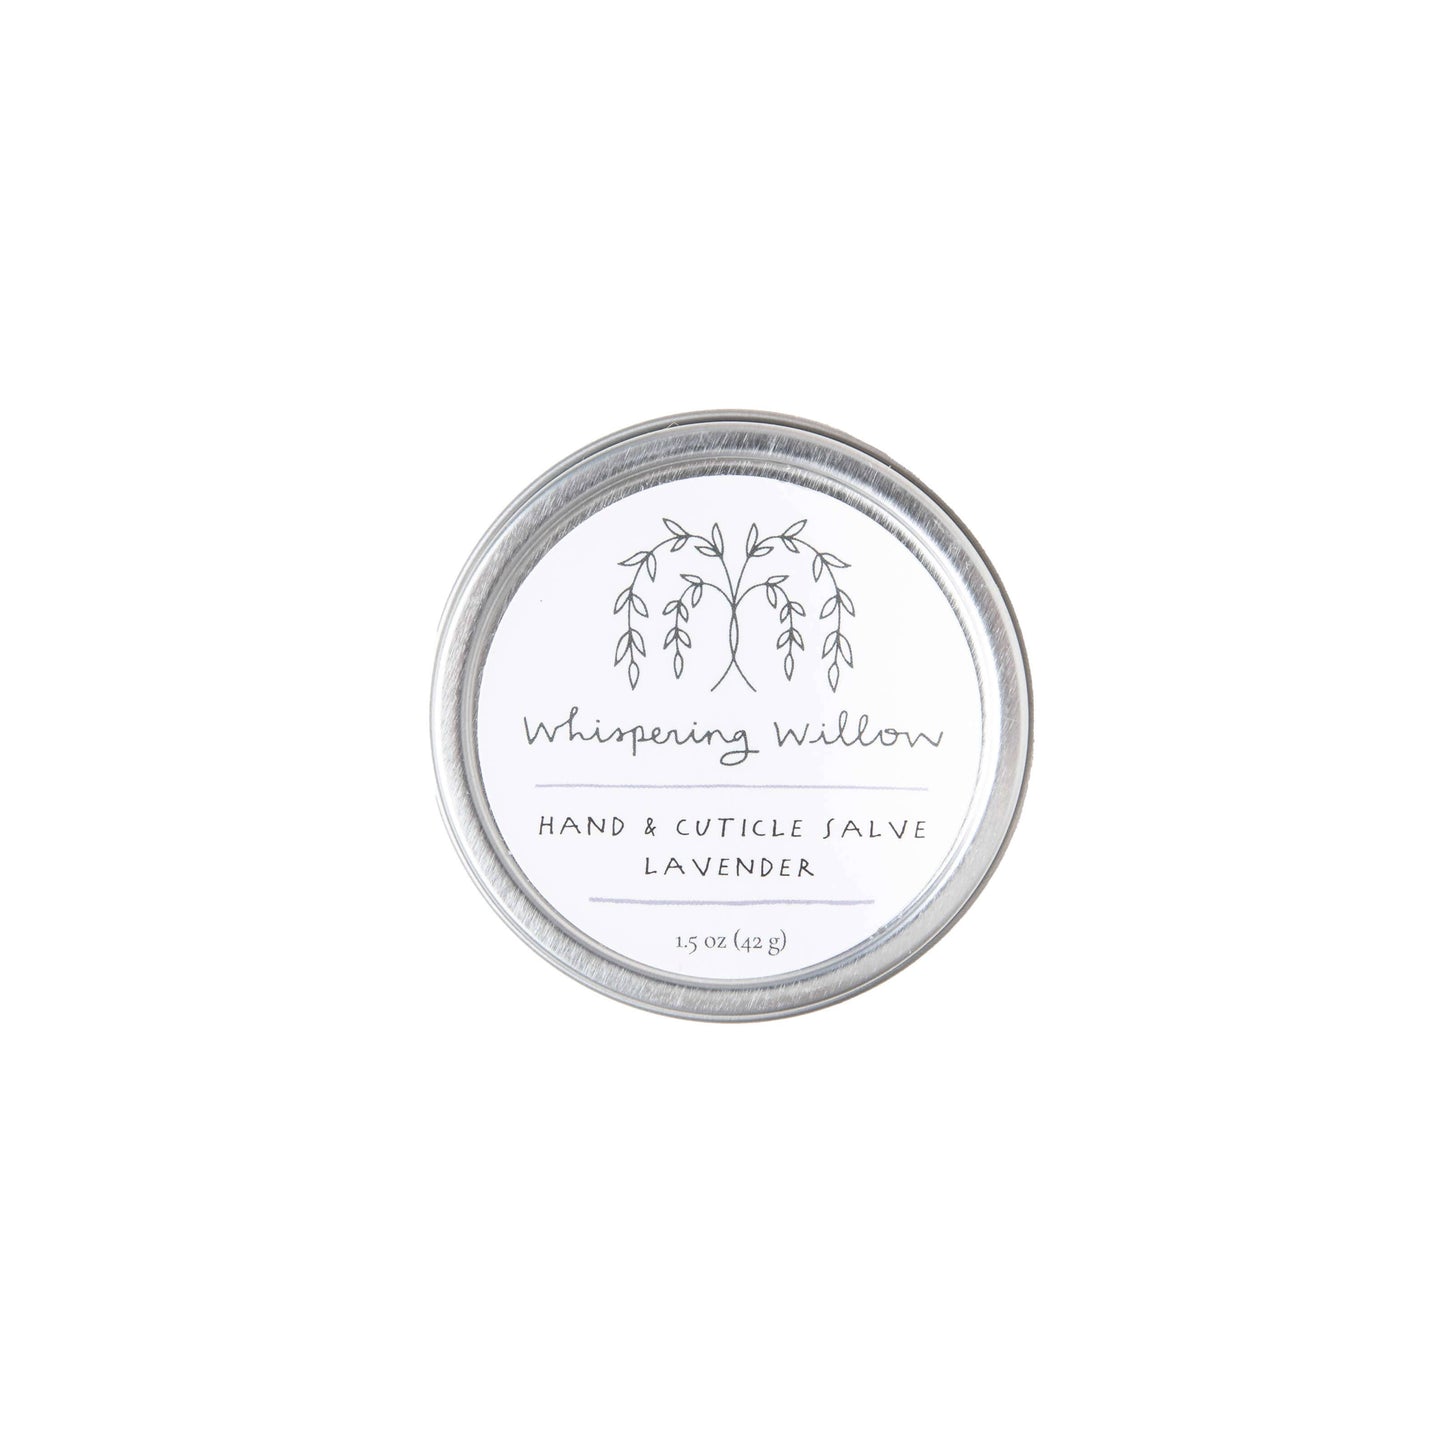 Hand & Cuticle Salve - Lavender - Storm and Sky Shoppe